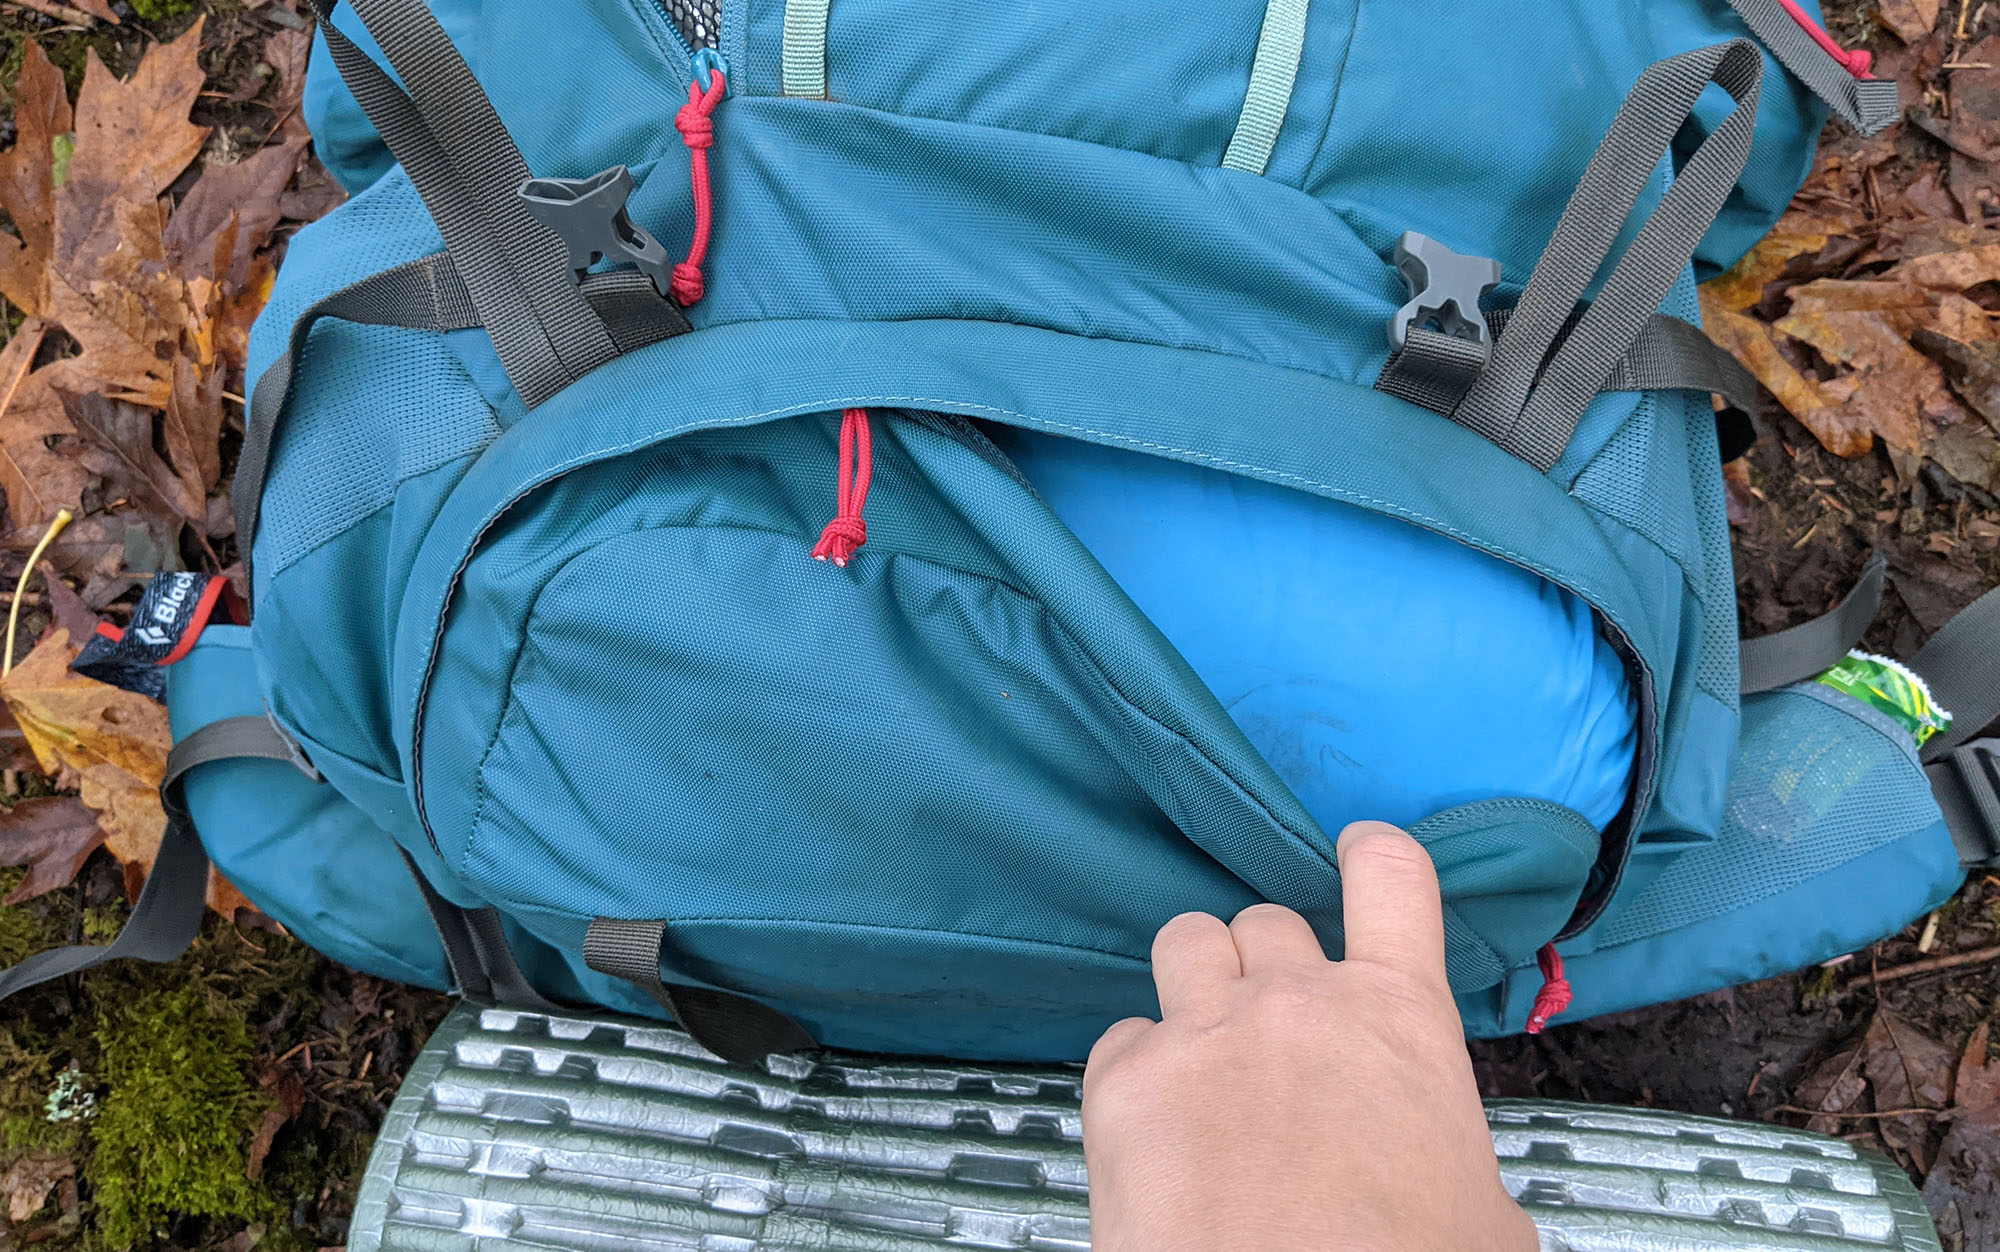 The undercarriage zipper may be useful to backpackers who tend to store frequently used items at the bottom of their pack. 